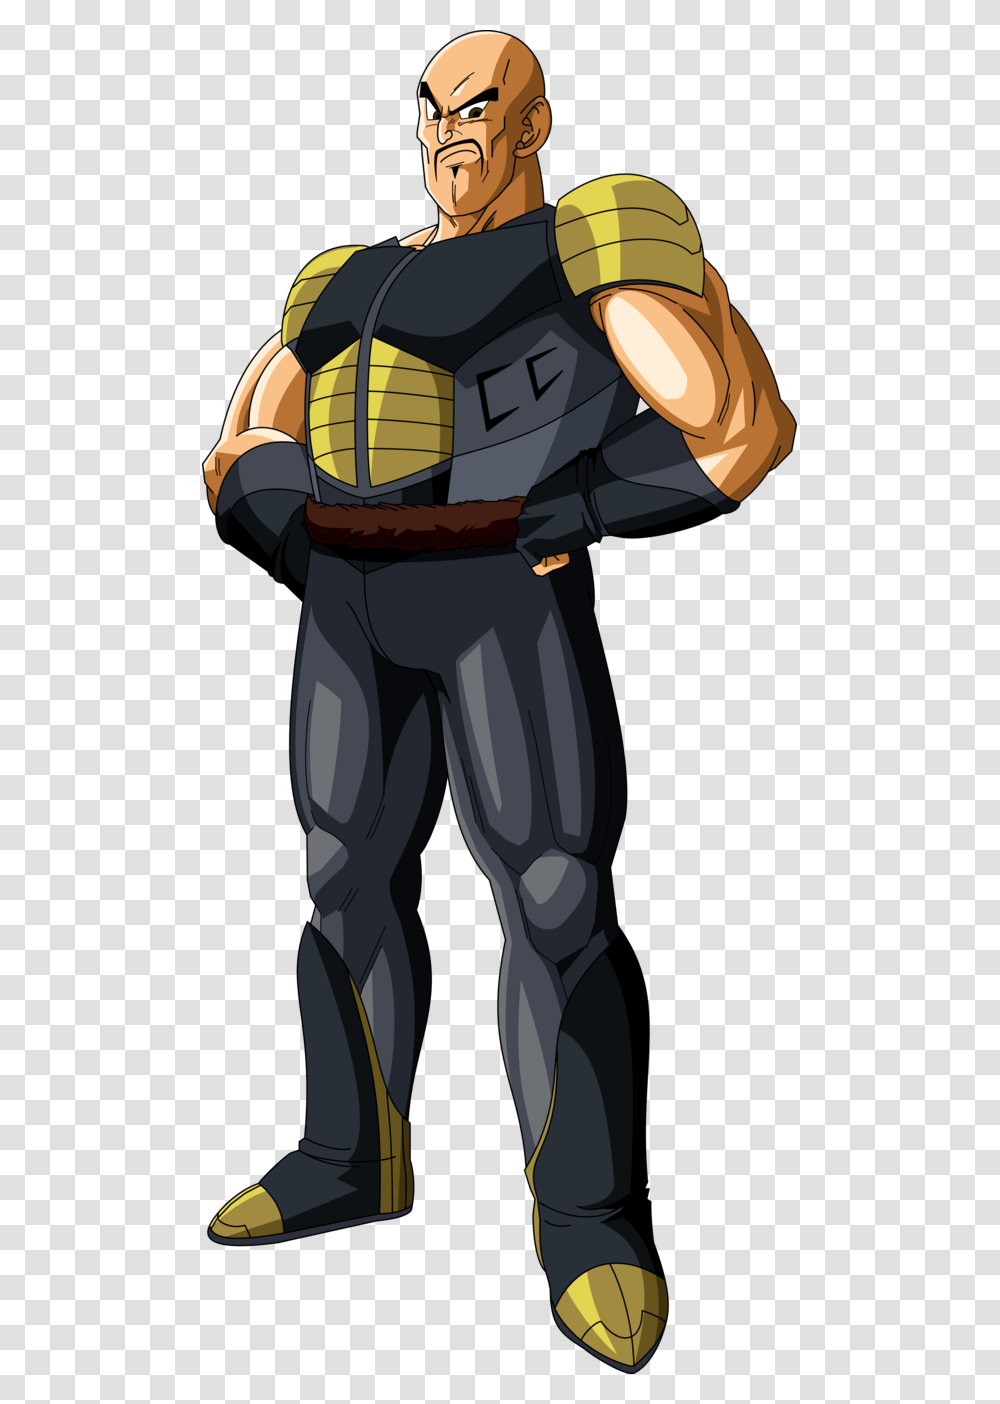 Drawing The Scouter Was A Bit Tricky For Me Neo Ginyu Force Nappa, Person, Helmet, Pants Transparent Png